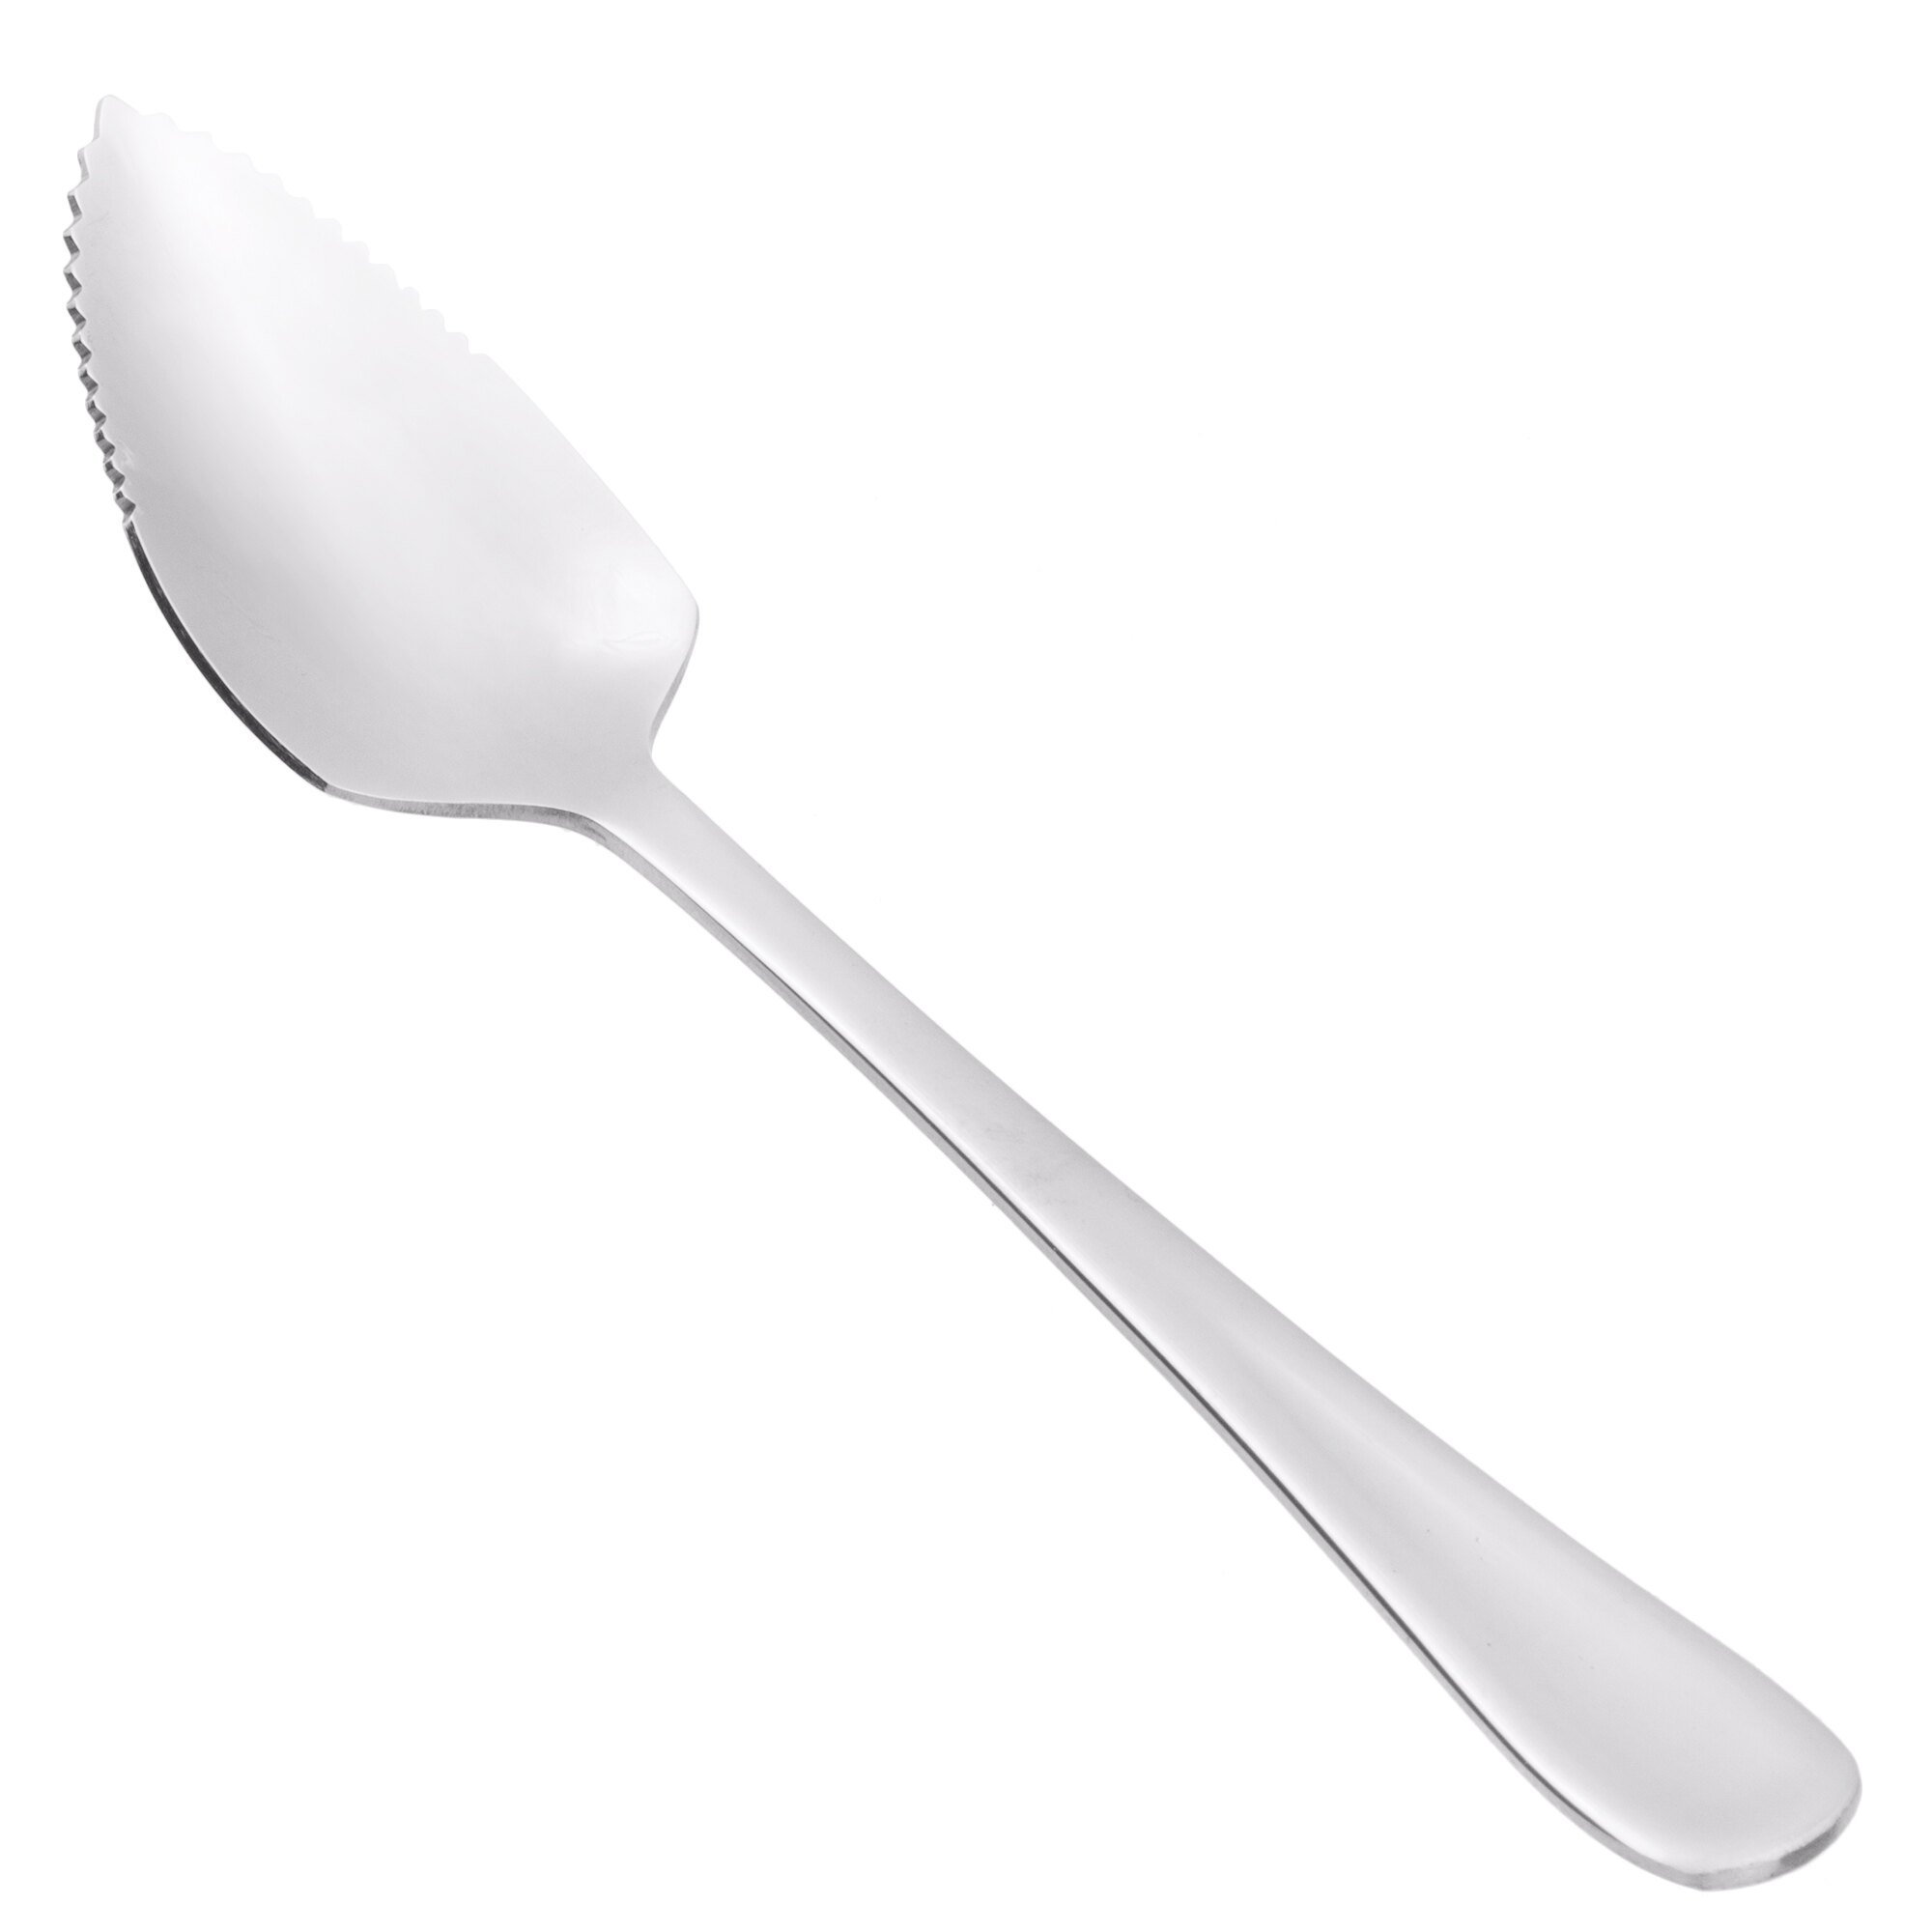 windsor grapefruit spoon with serated edge